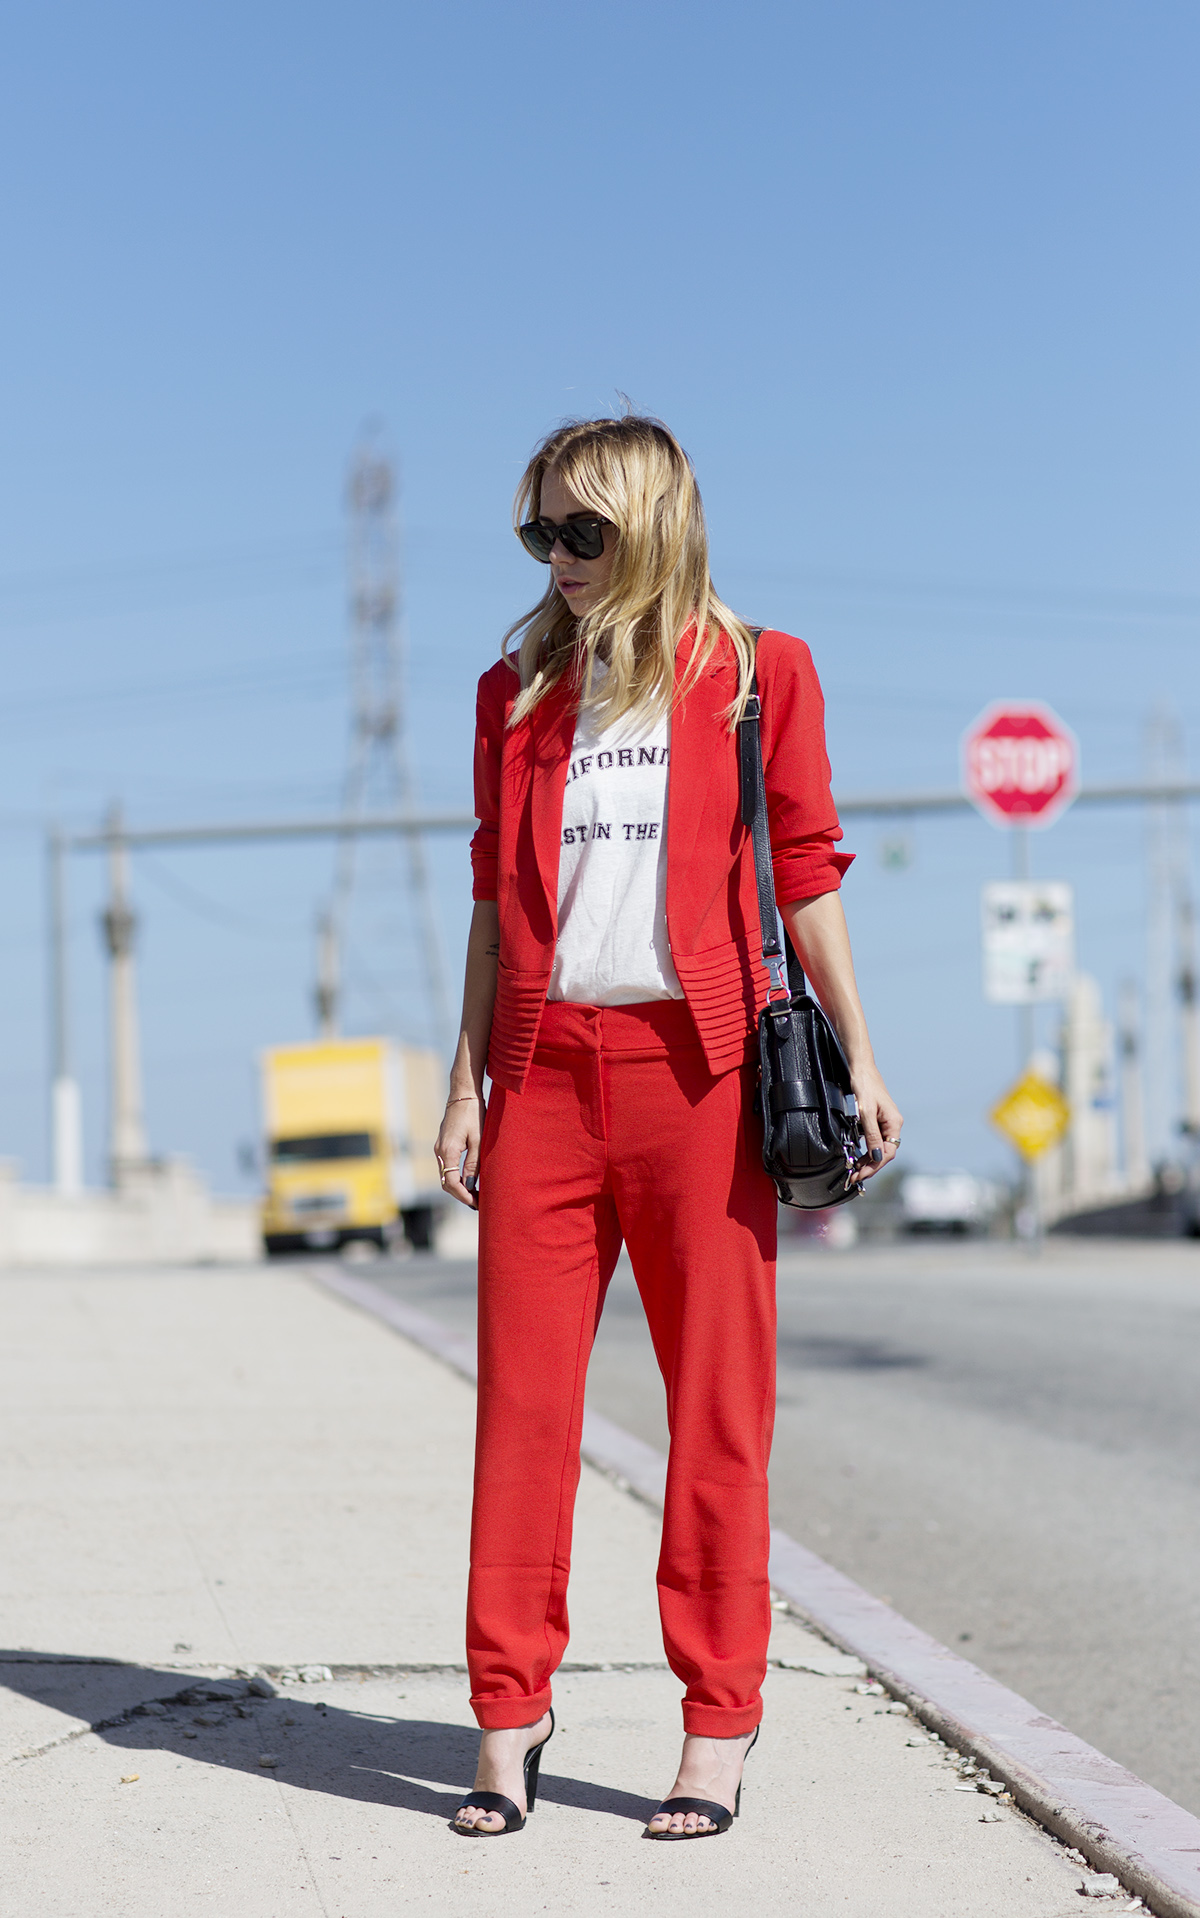 Red Alert! How to wear red to suit your style personality - Beth